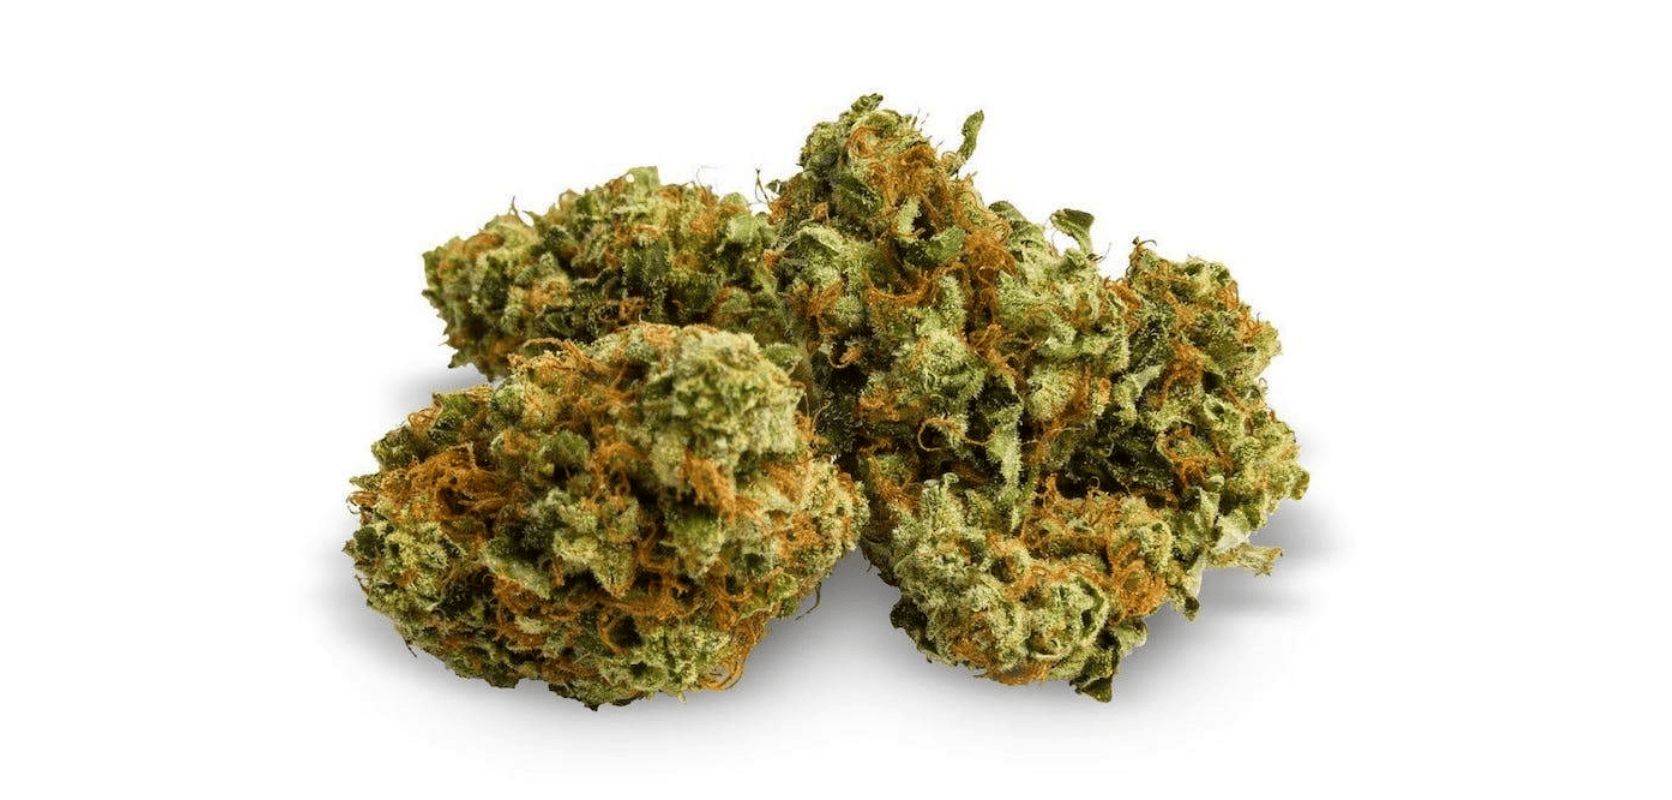 Interested in experiencing the convenience to buy Canadian weed online? 